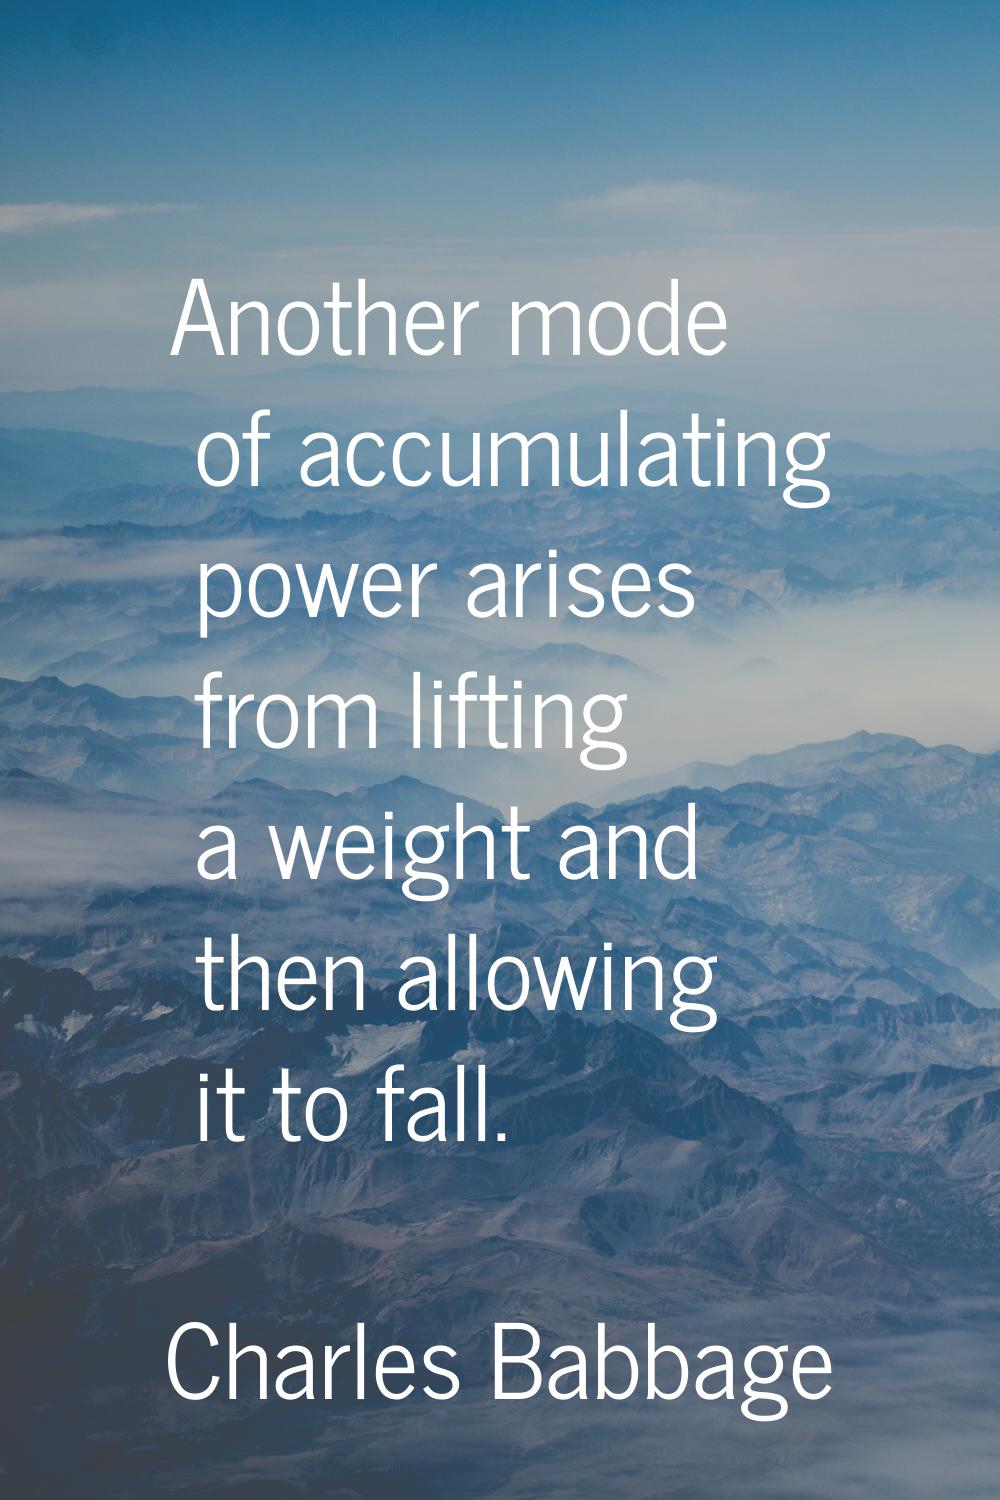 Another mode of accumulating power arises from lifting a weight and then allowing it to fall.